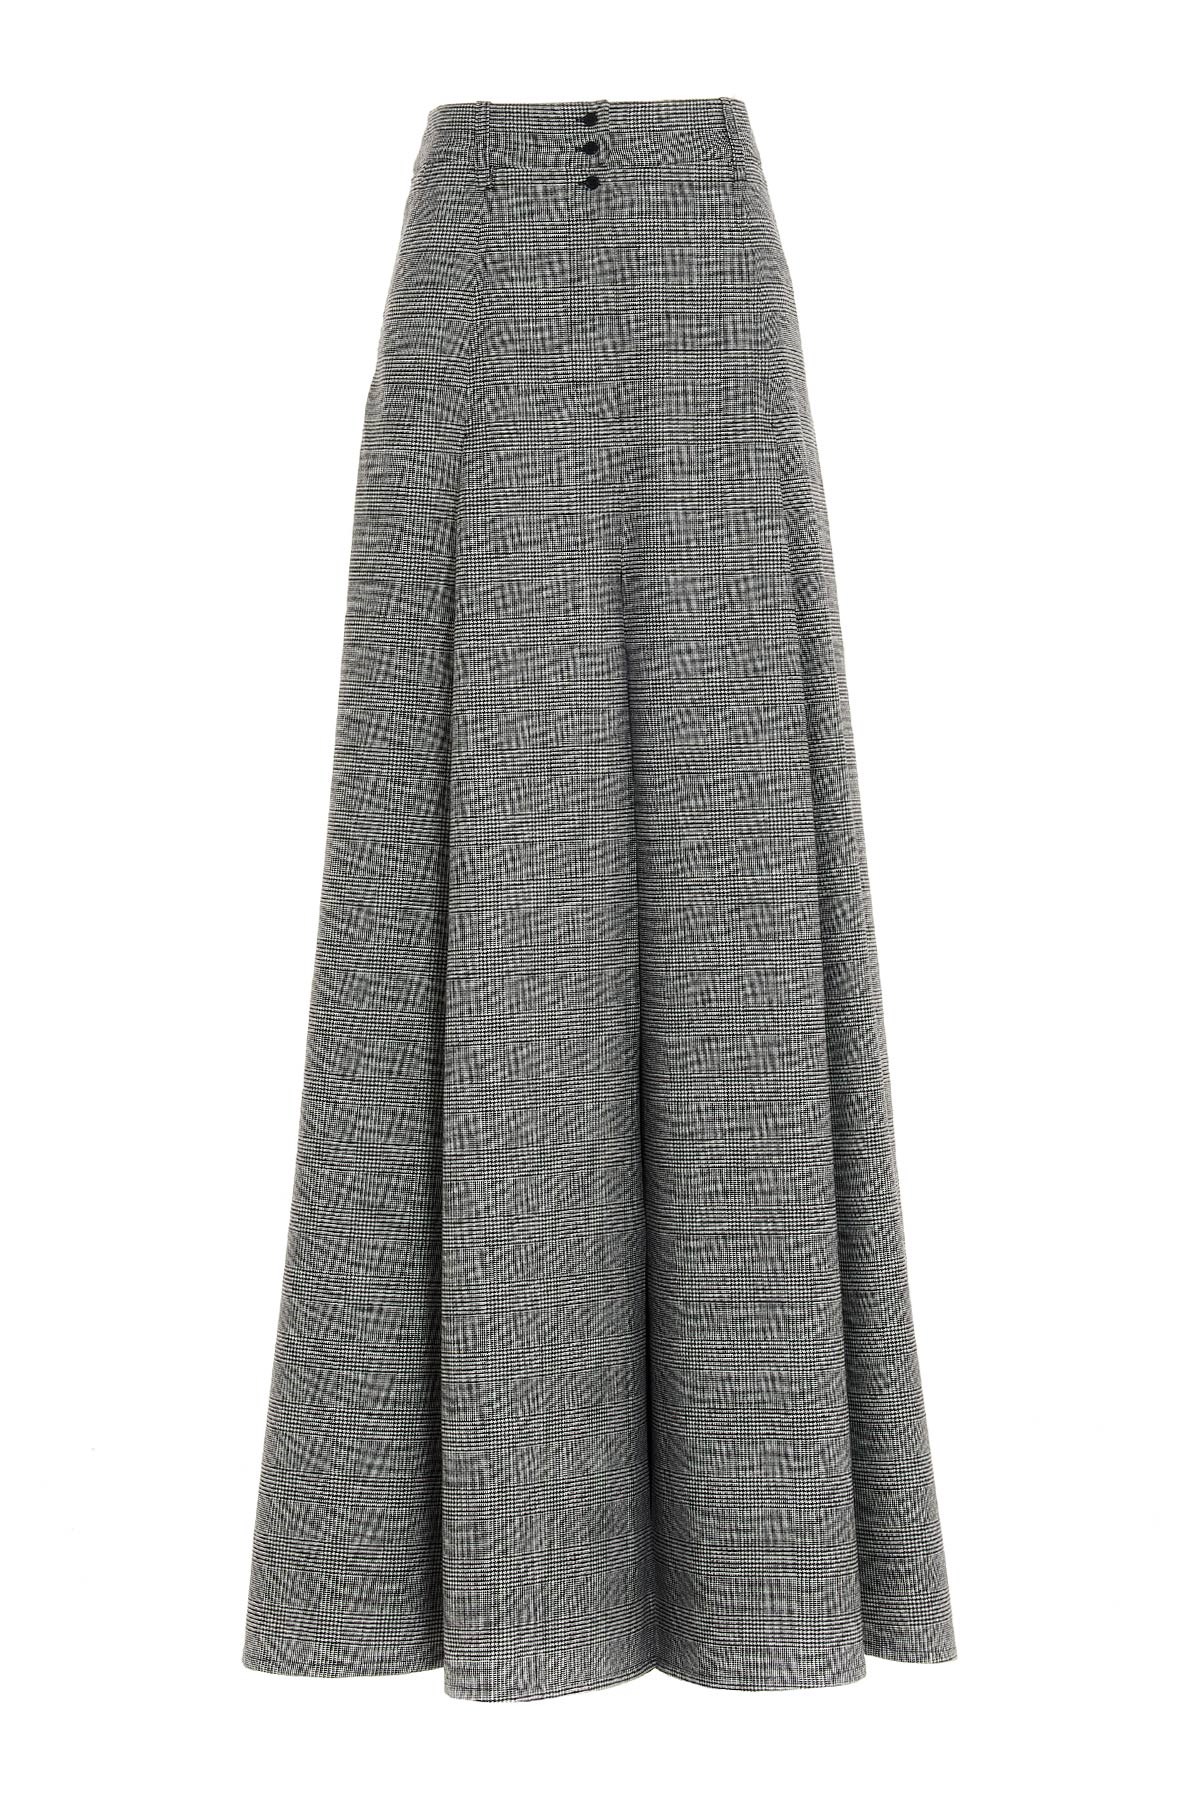 VETEMENTS Front And Back Slit Wool Skirt